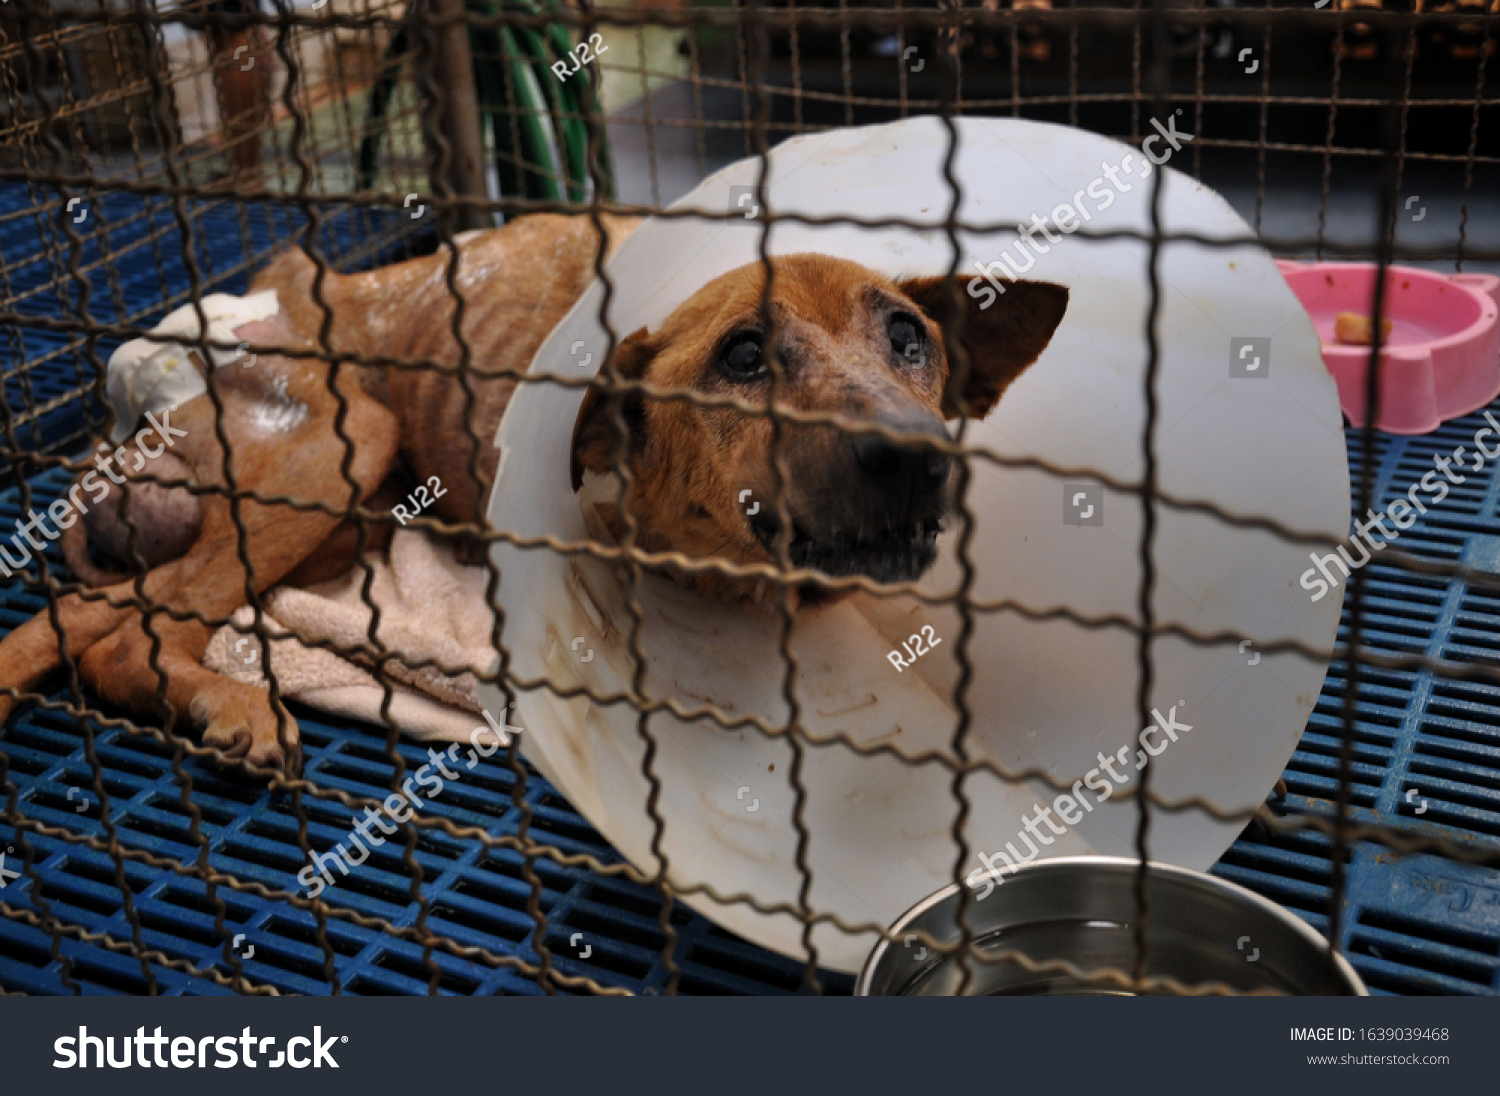 Blurred a homeless old dog's face who wearing a protective veterinary collar after a surgical operation inside the cage at animal shelter #1639039468